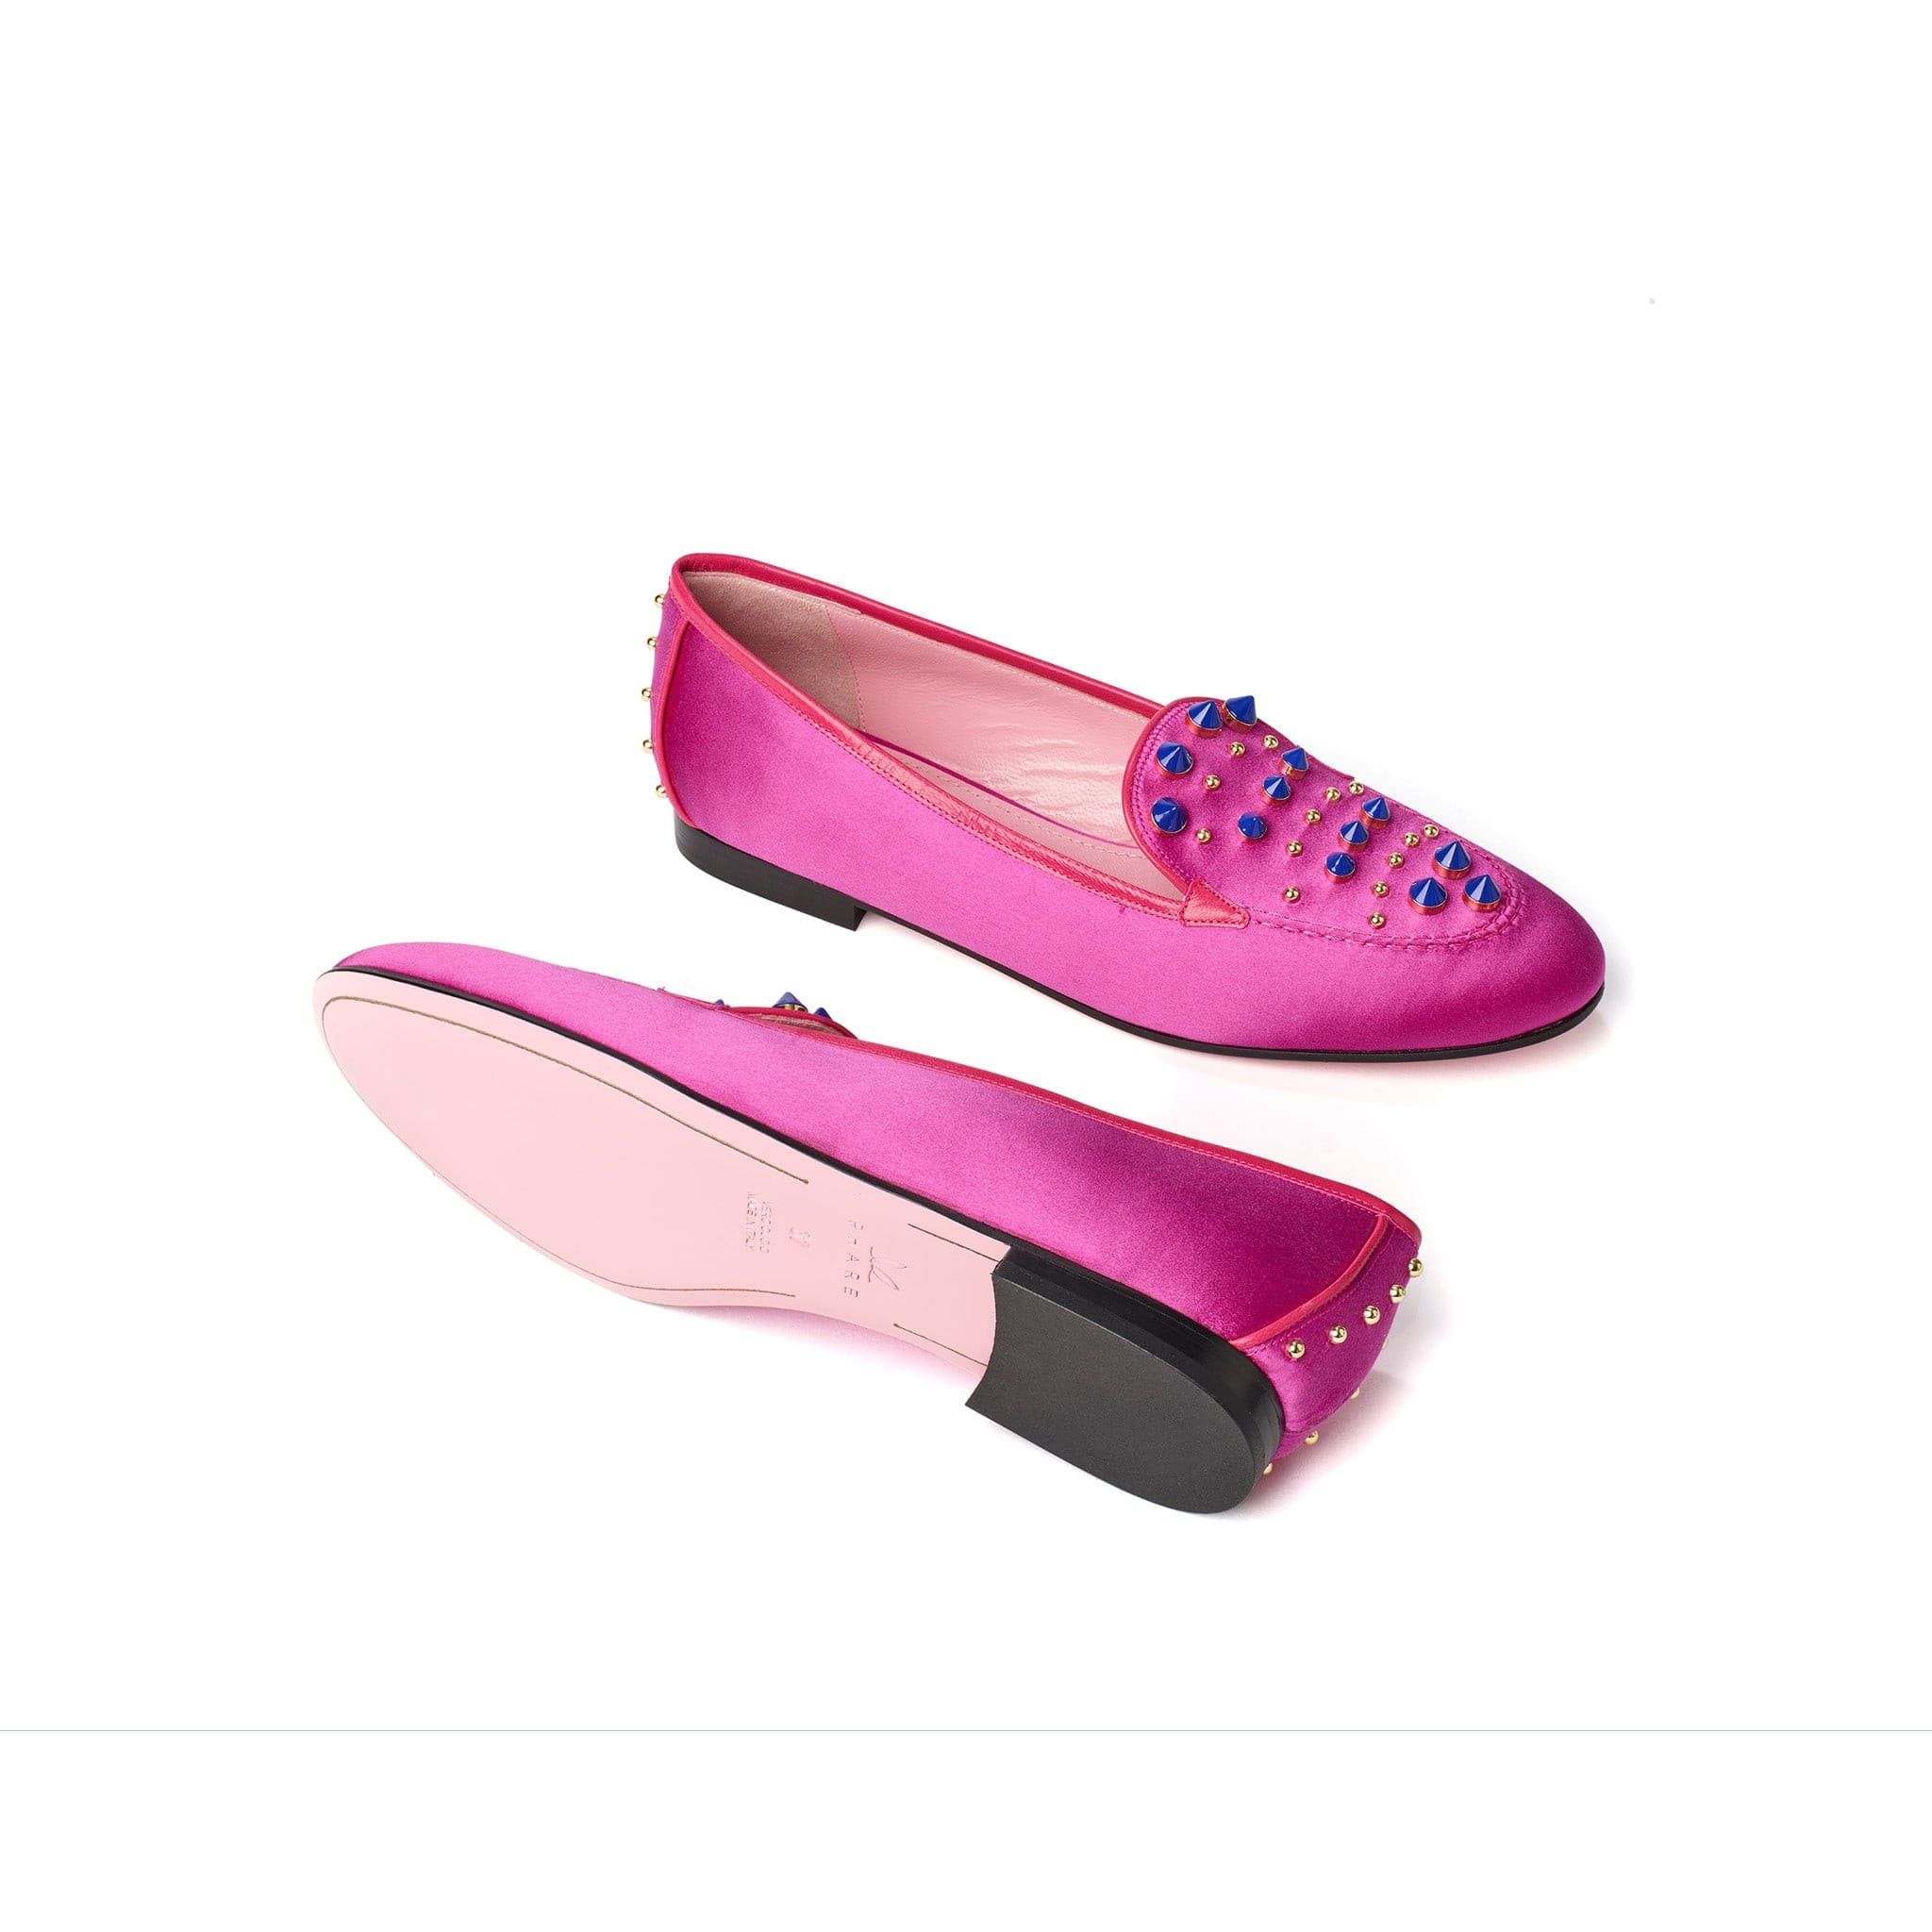 Phare Studded loafer in magenta silk satin with blue and gold studs sole view 